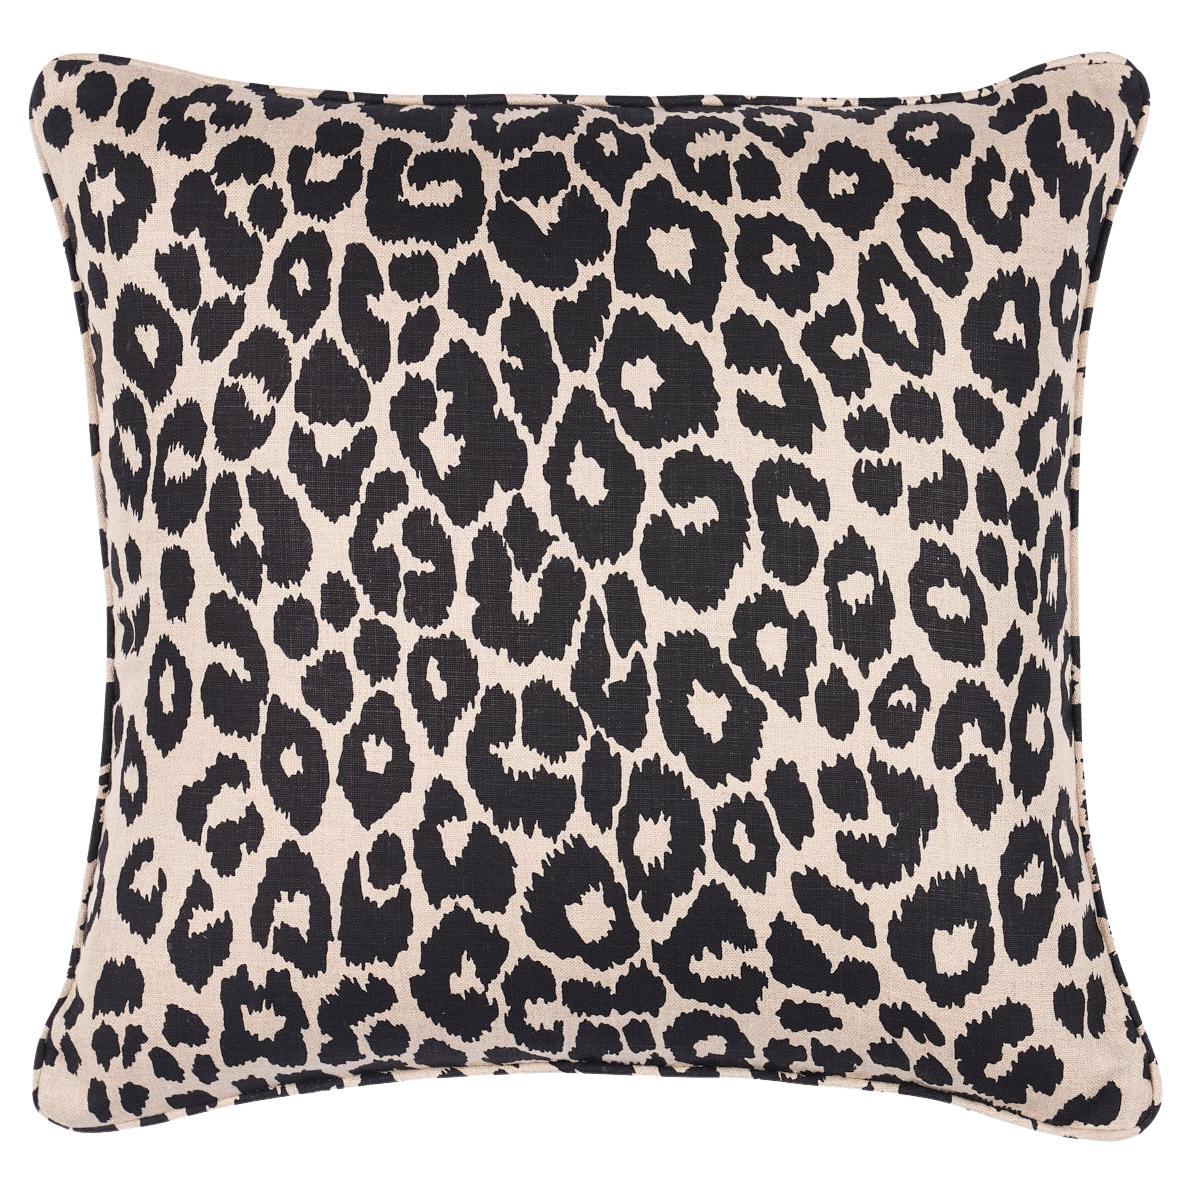 Schumacher Iconic Leopard 20" Pillow in Ebony/Natural For Sale